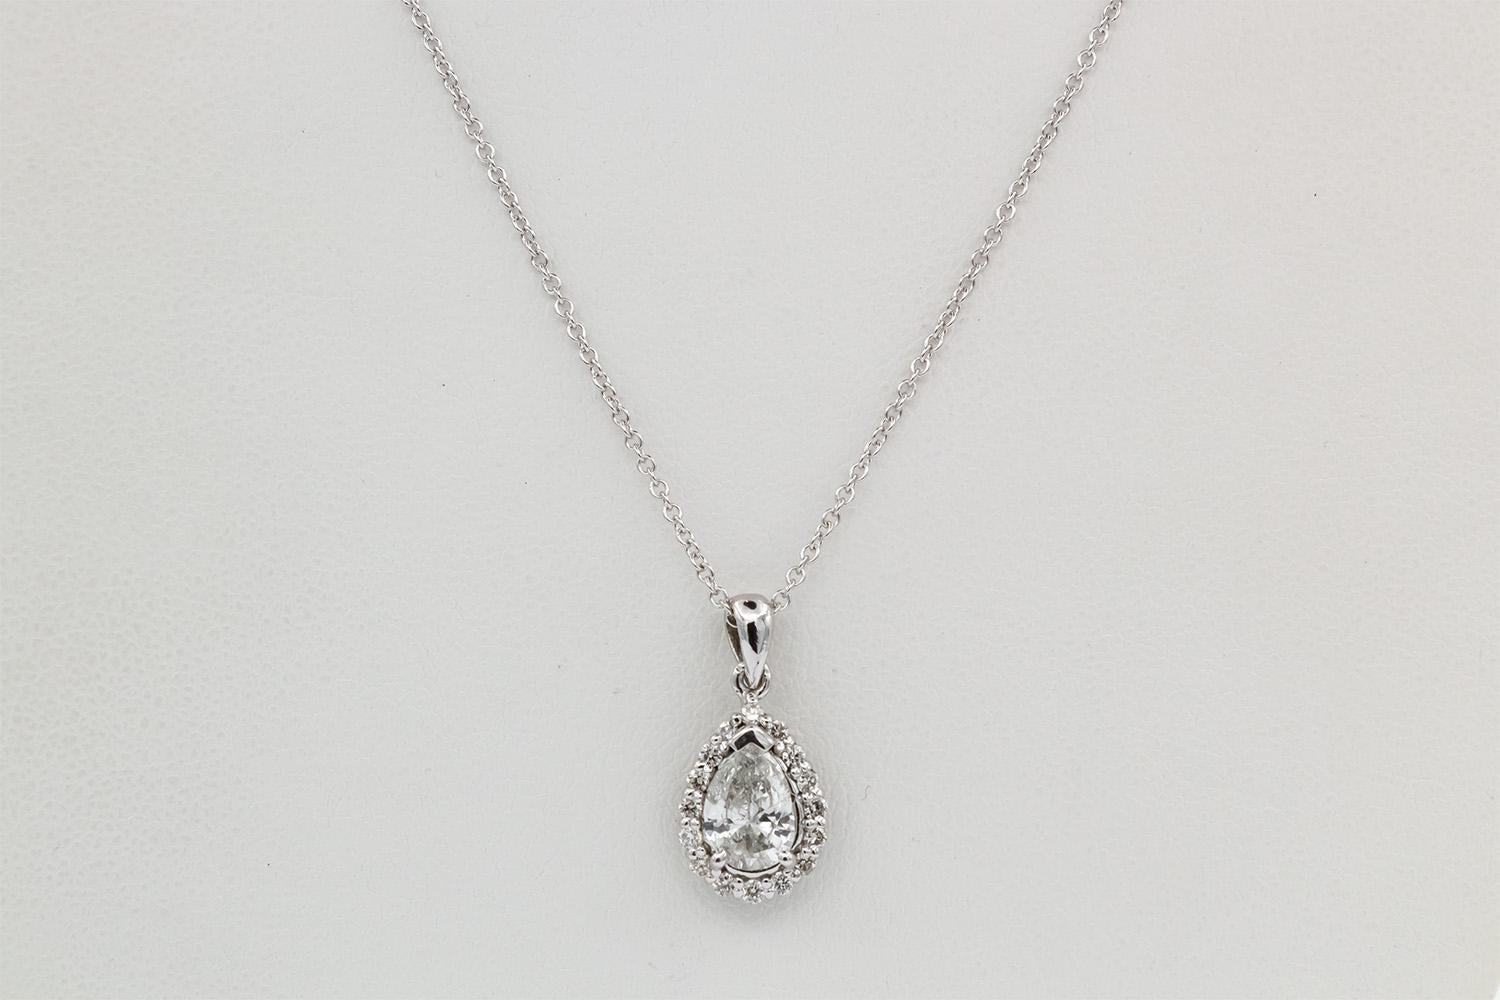 We are pleased to present this 14k White Gold & Pear Diamond Halo Pendant Necklace. This cute piece features a 1.10ct I-J/I1-I2 pear cut diamond set in a 14k white gold halo pendant with 0.23ctw round brilliant cut diamonds on a 14k white gold